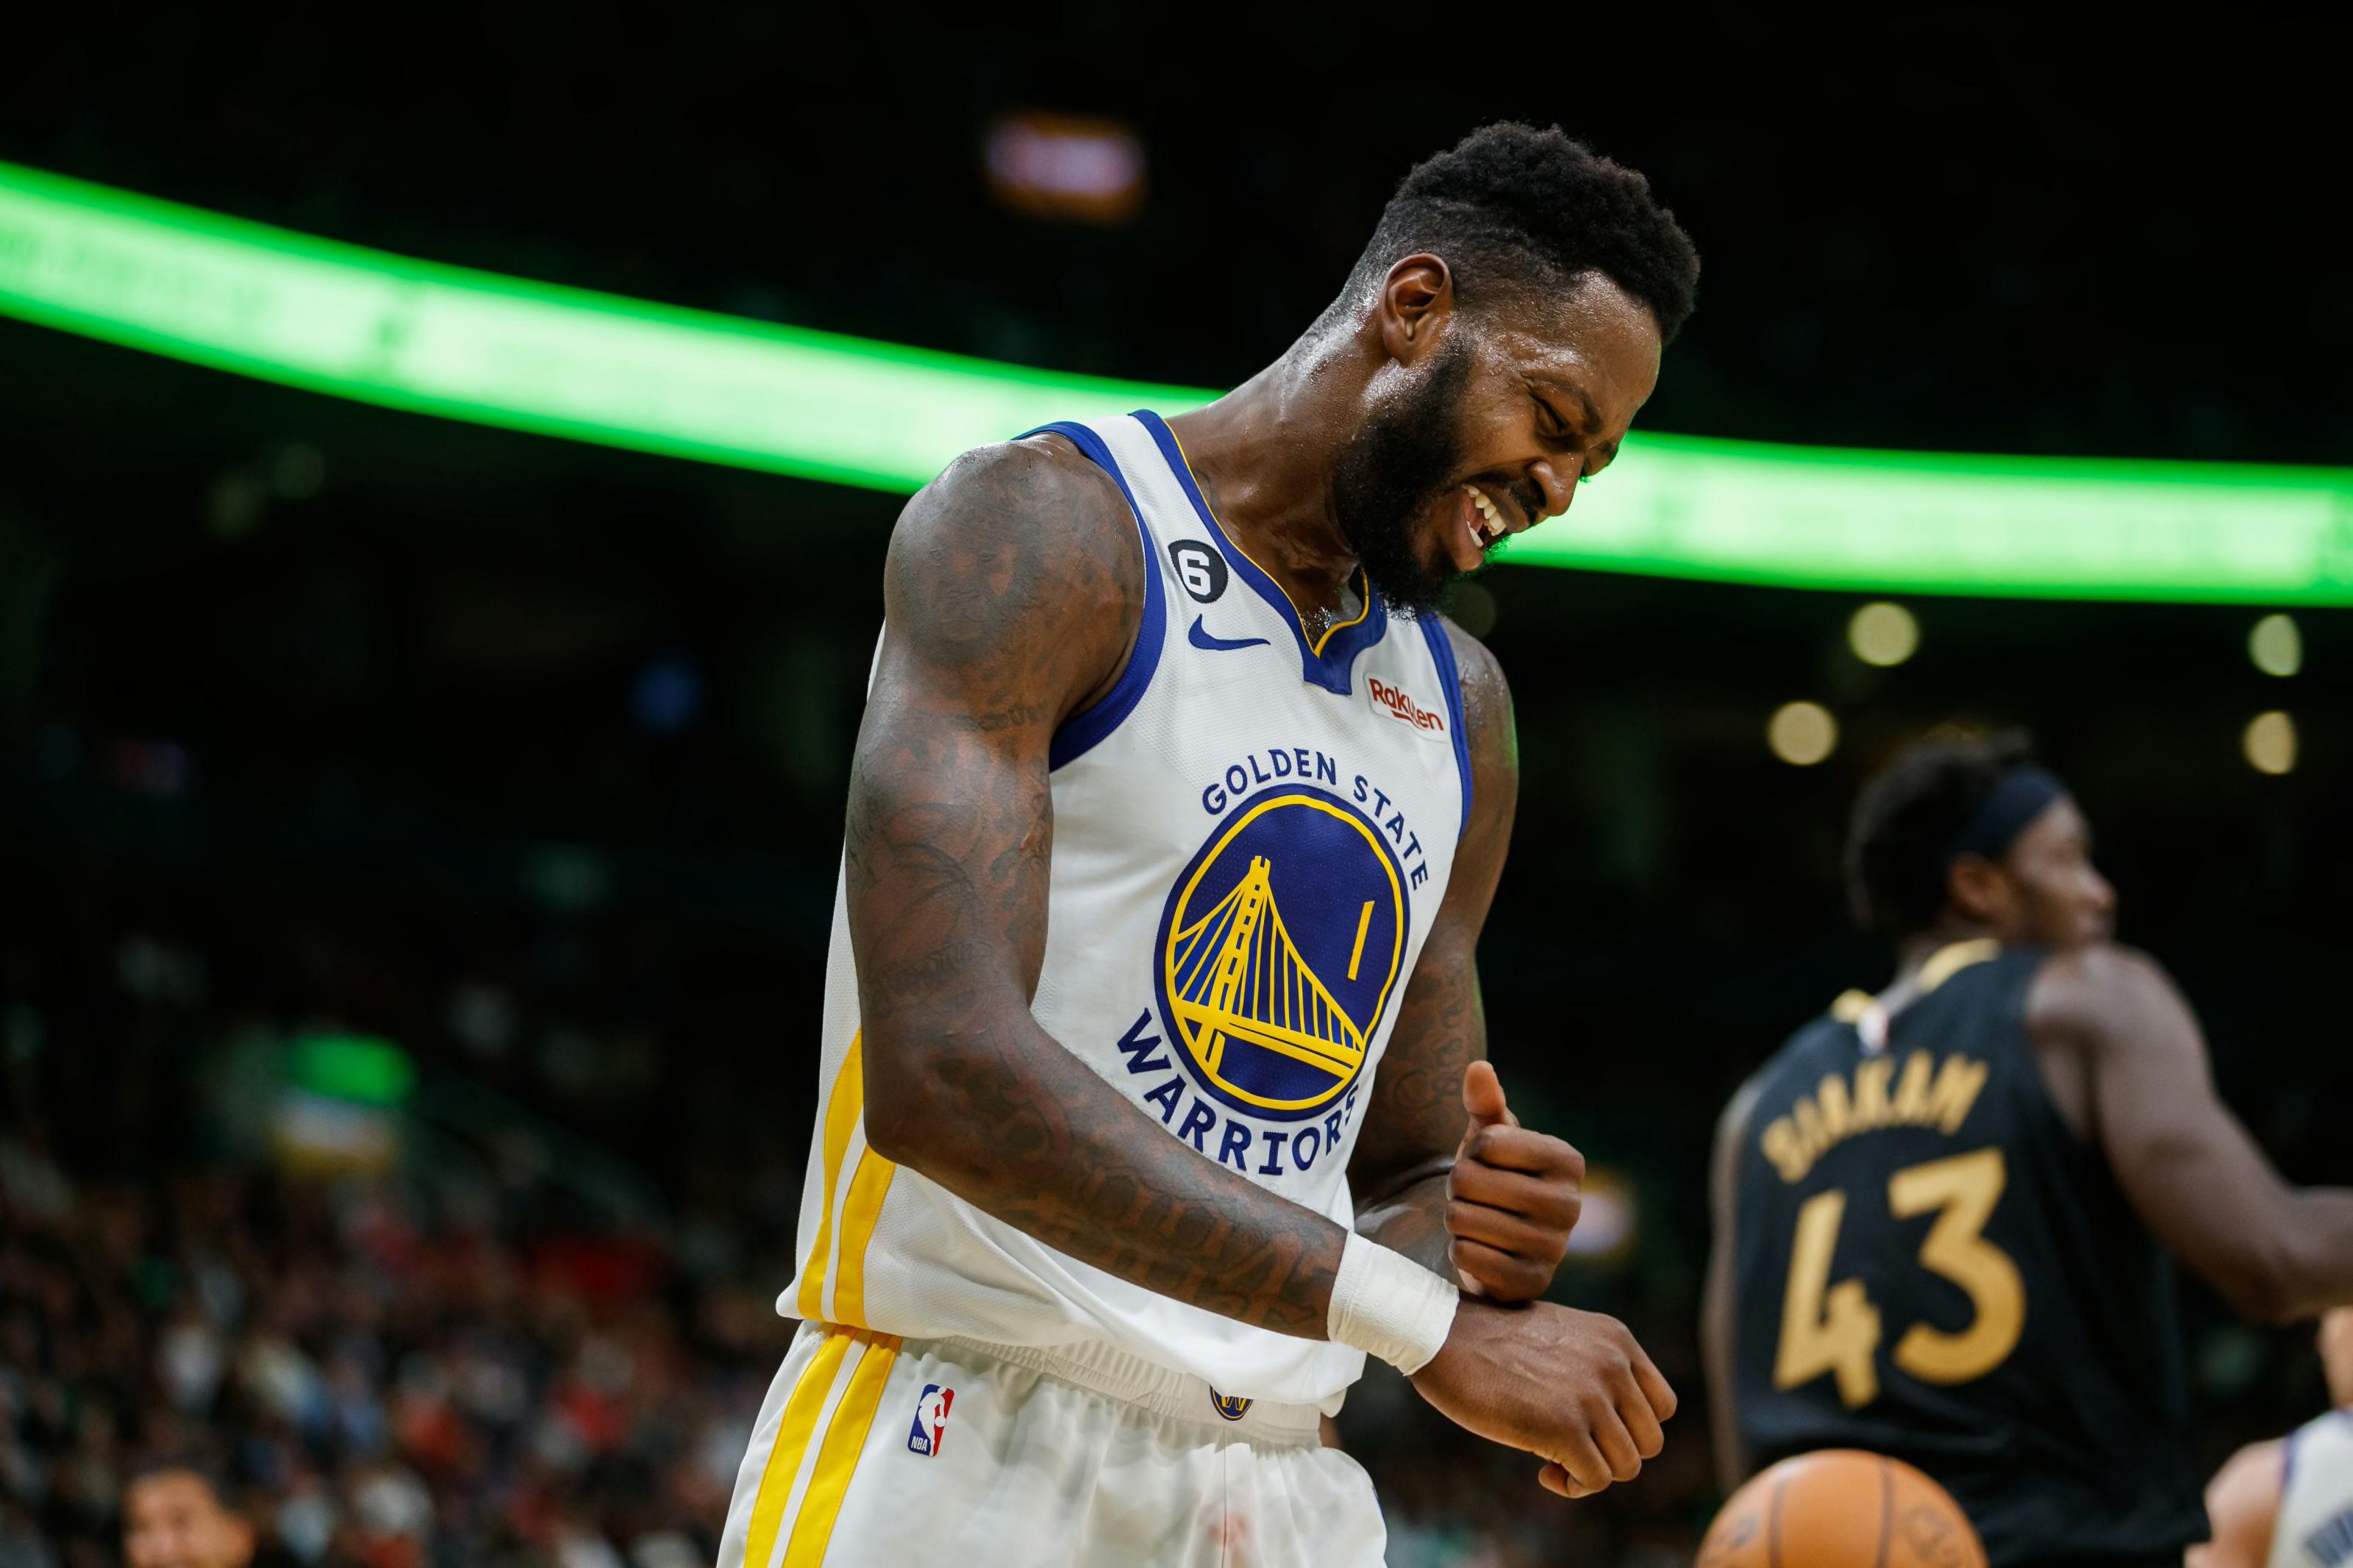 NBA Free Agency: Could Warriors desperation extend to former player?